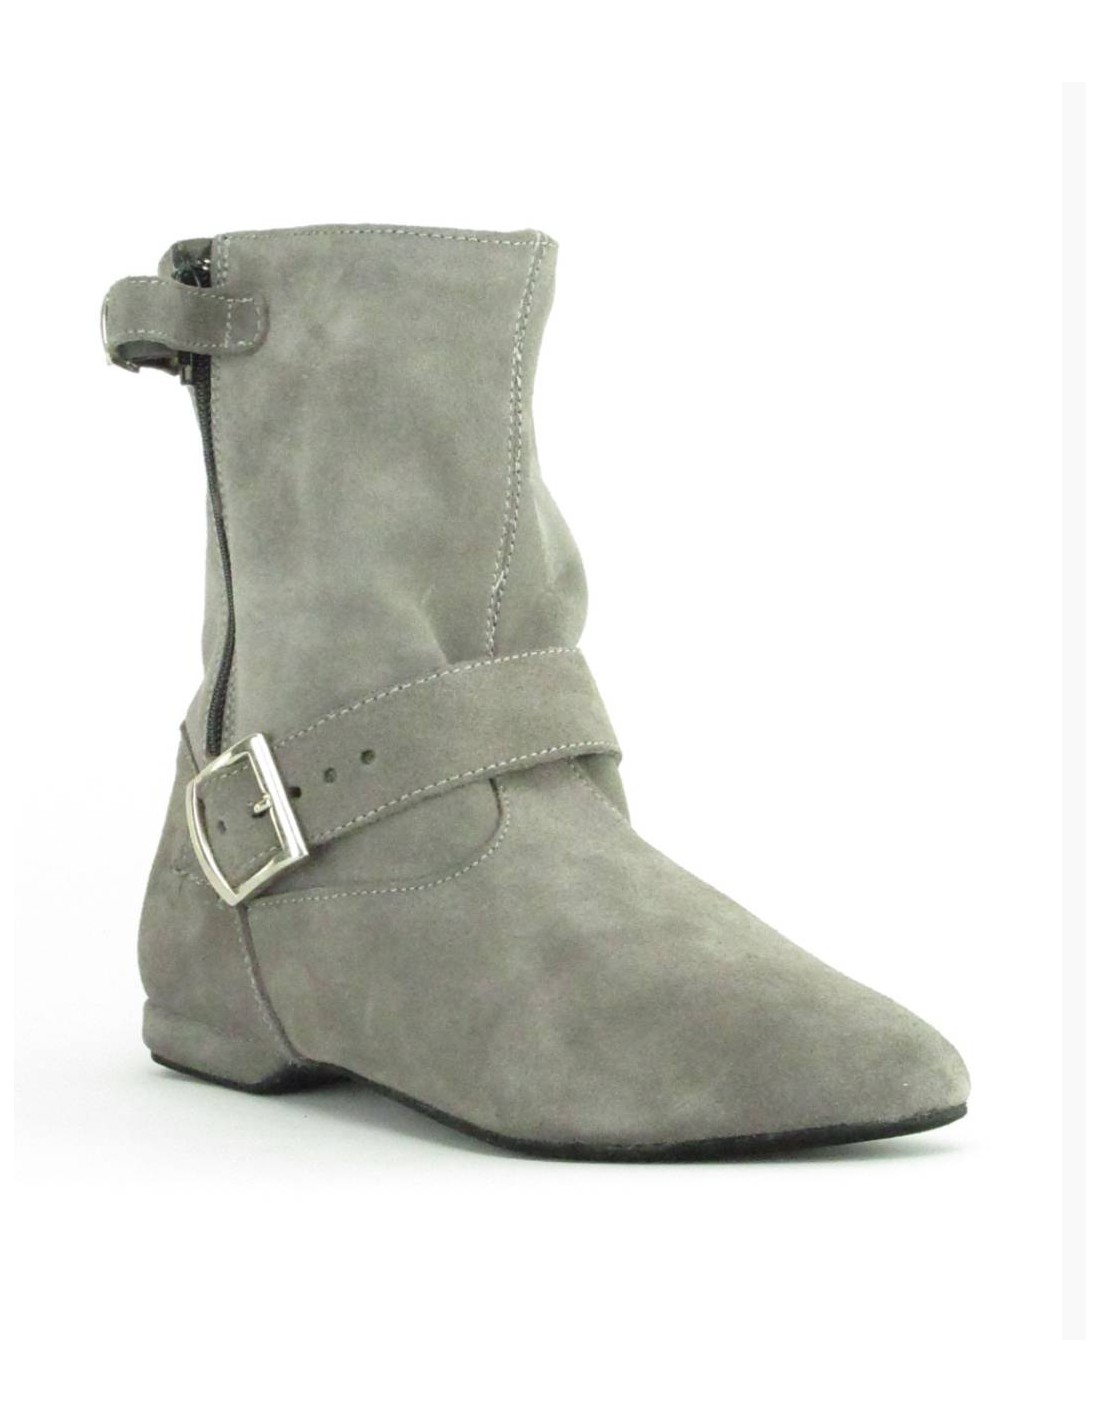 West Coast Swing Ankle Boot in grey 